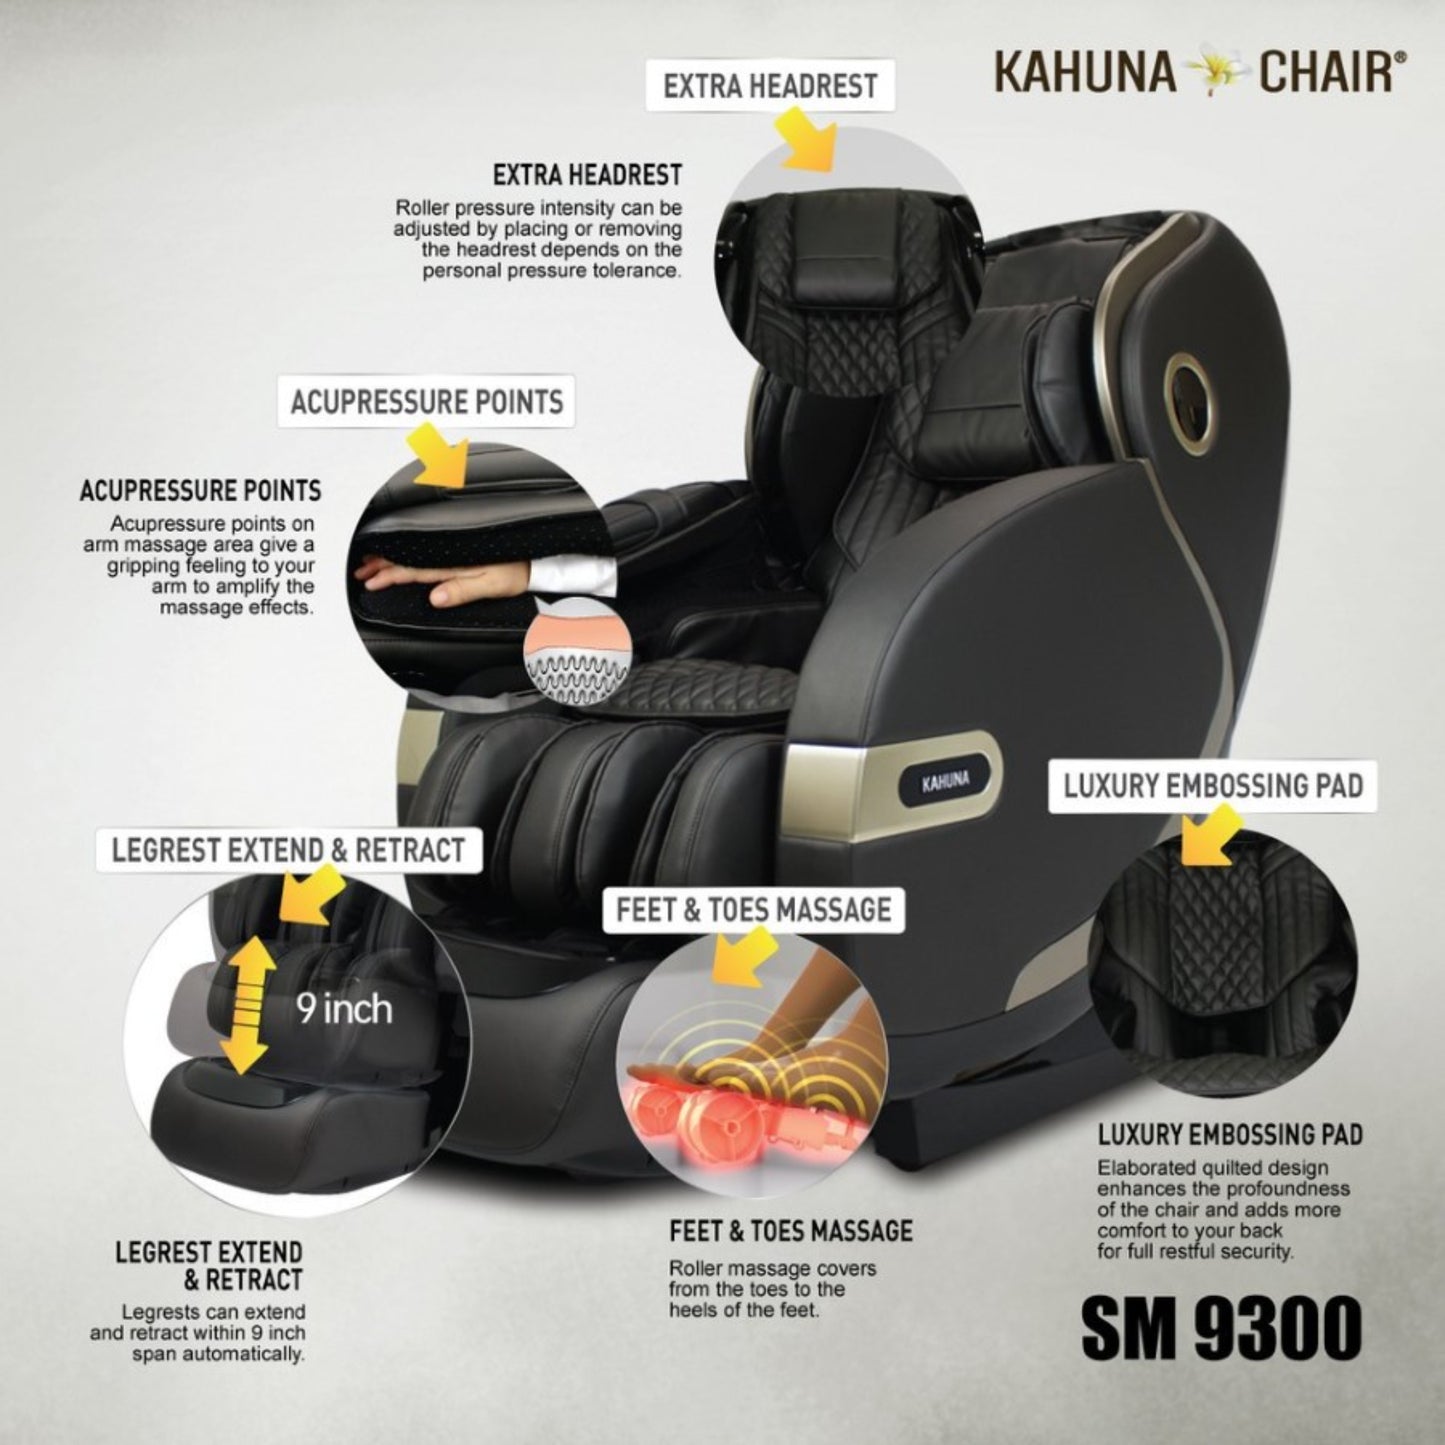 Kahuna Massage Chair 4D+@ Dual Air Float Flex HSL-track with Infrared heating SM-9300 Grey